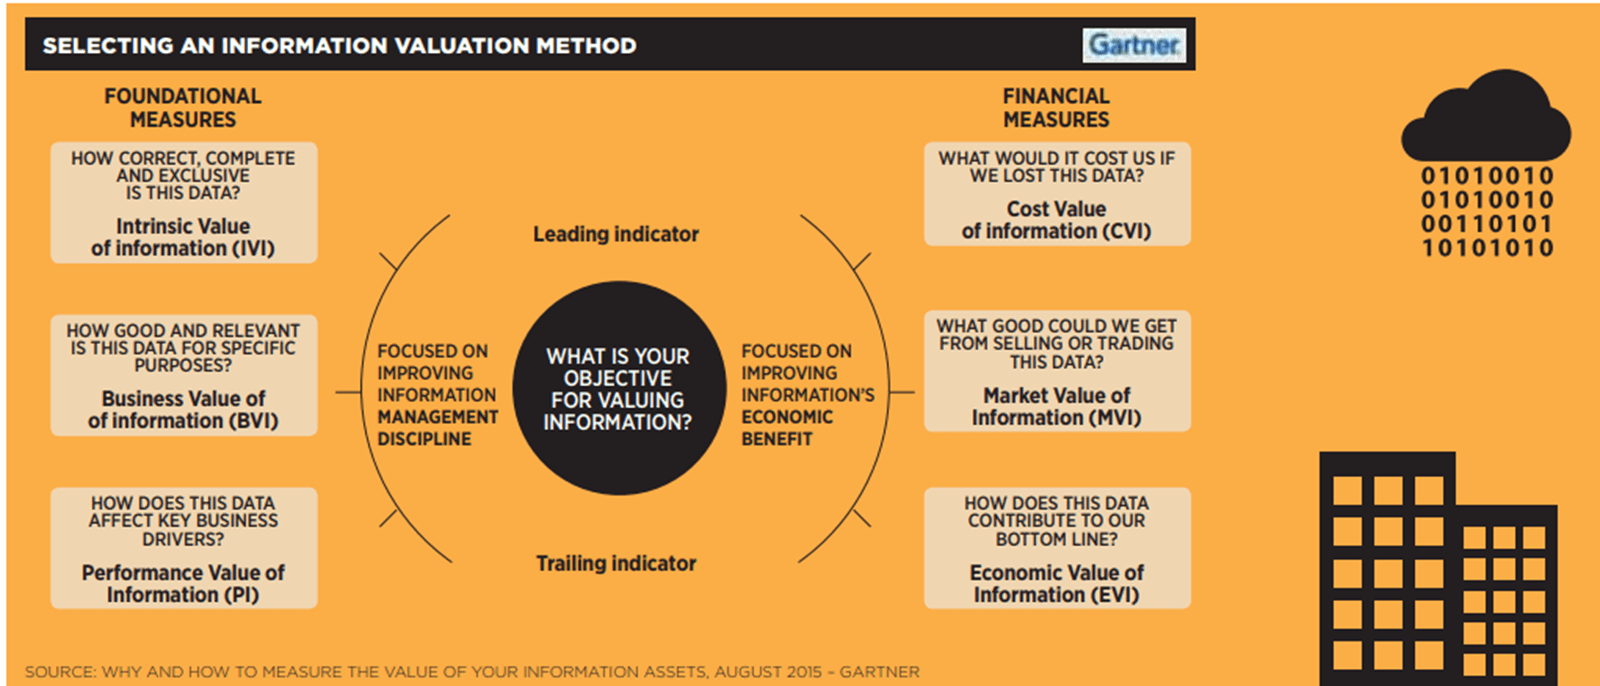 Figure 1: Selecting an information valuation method